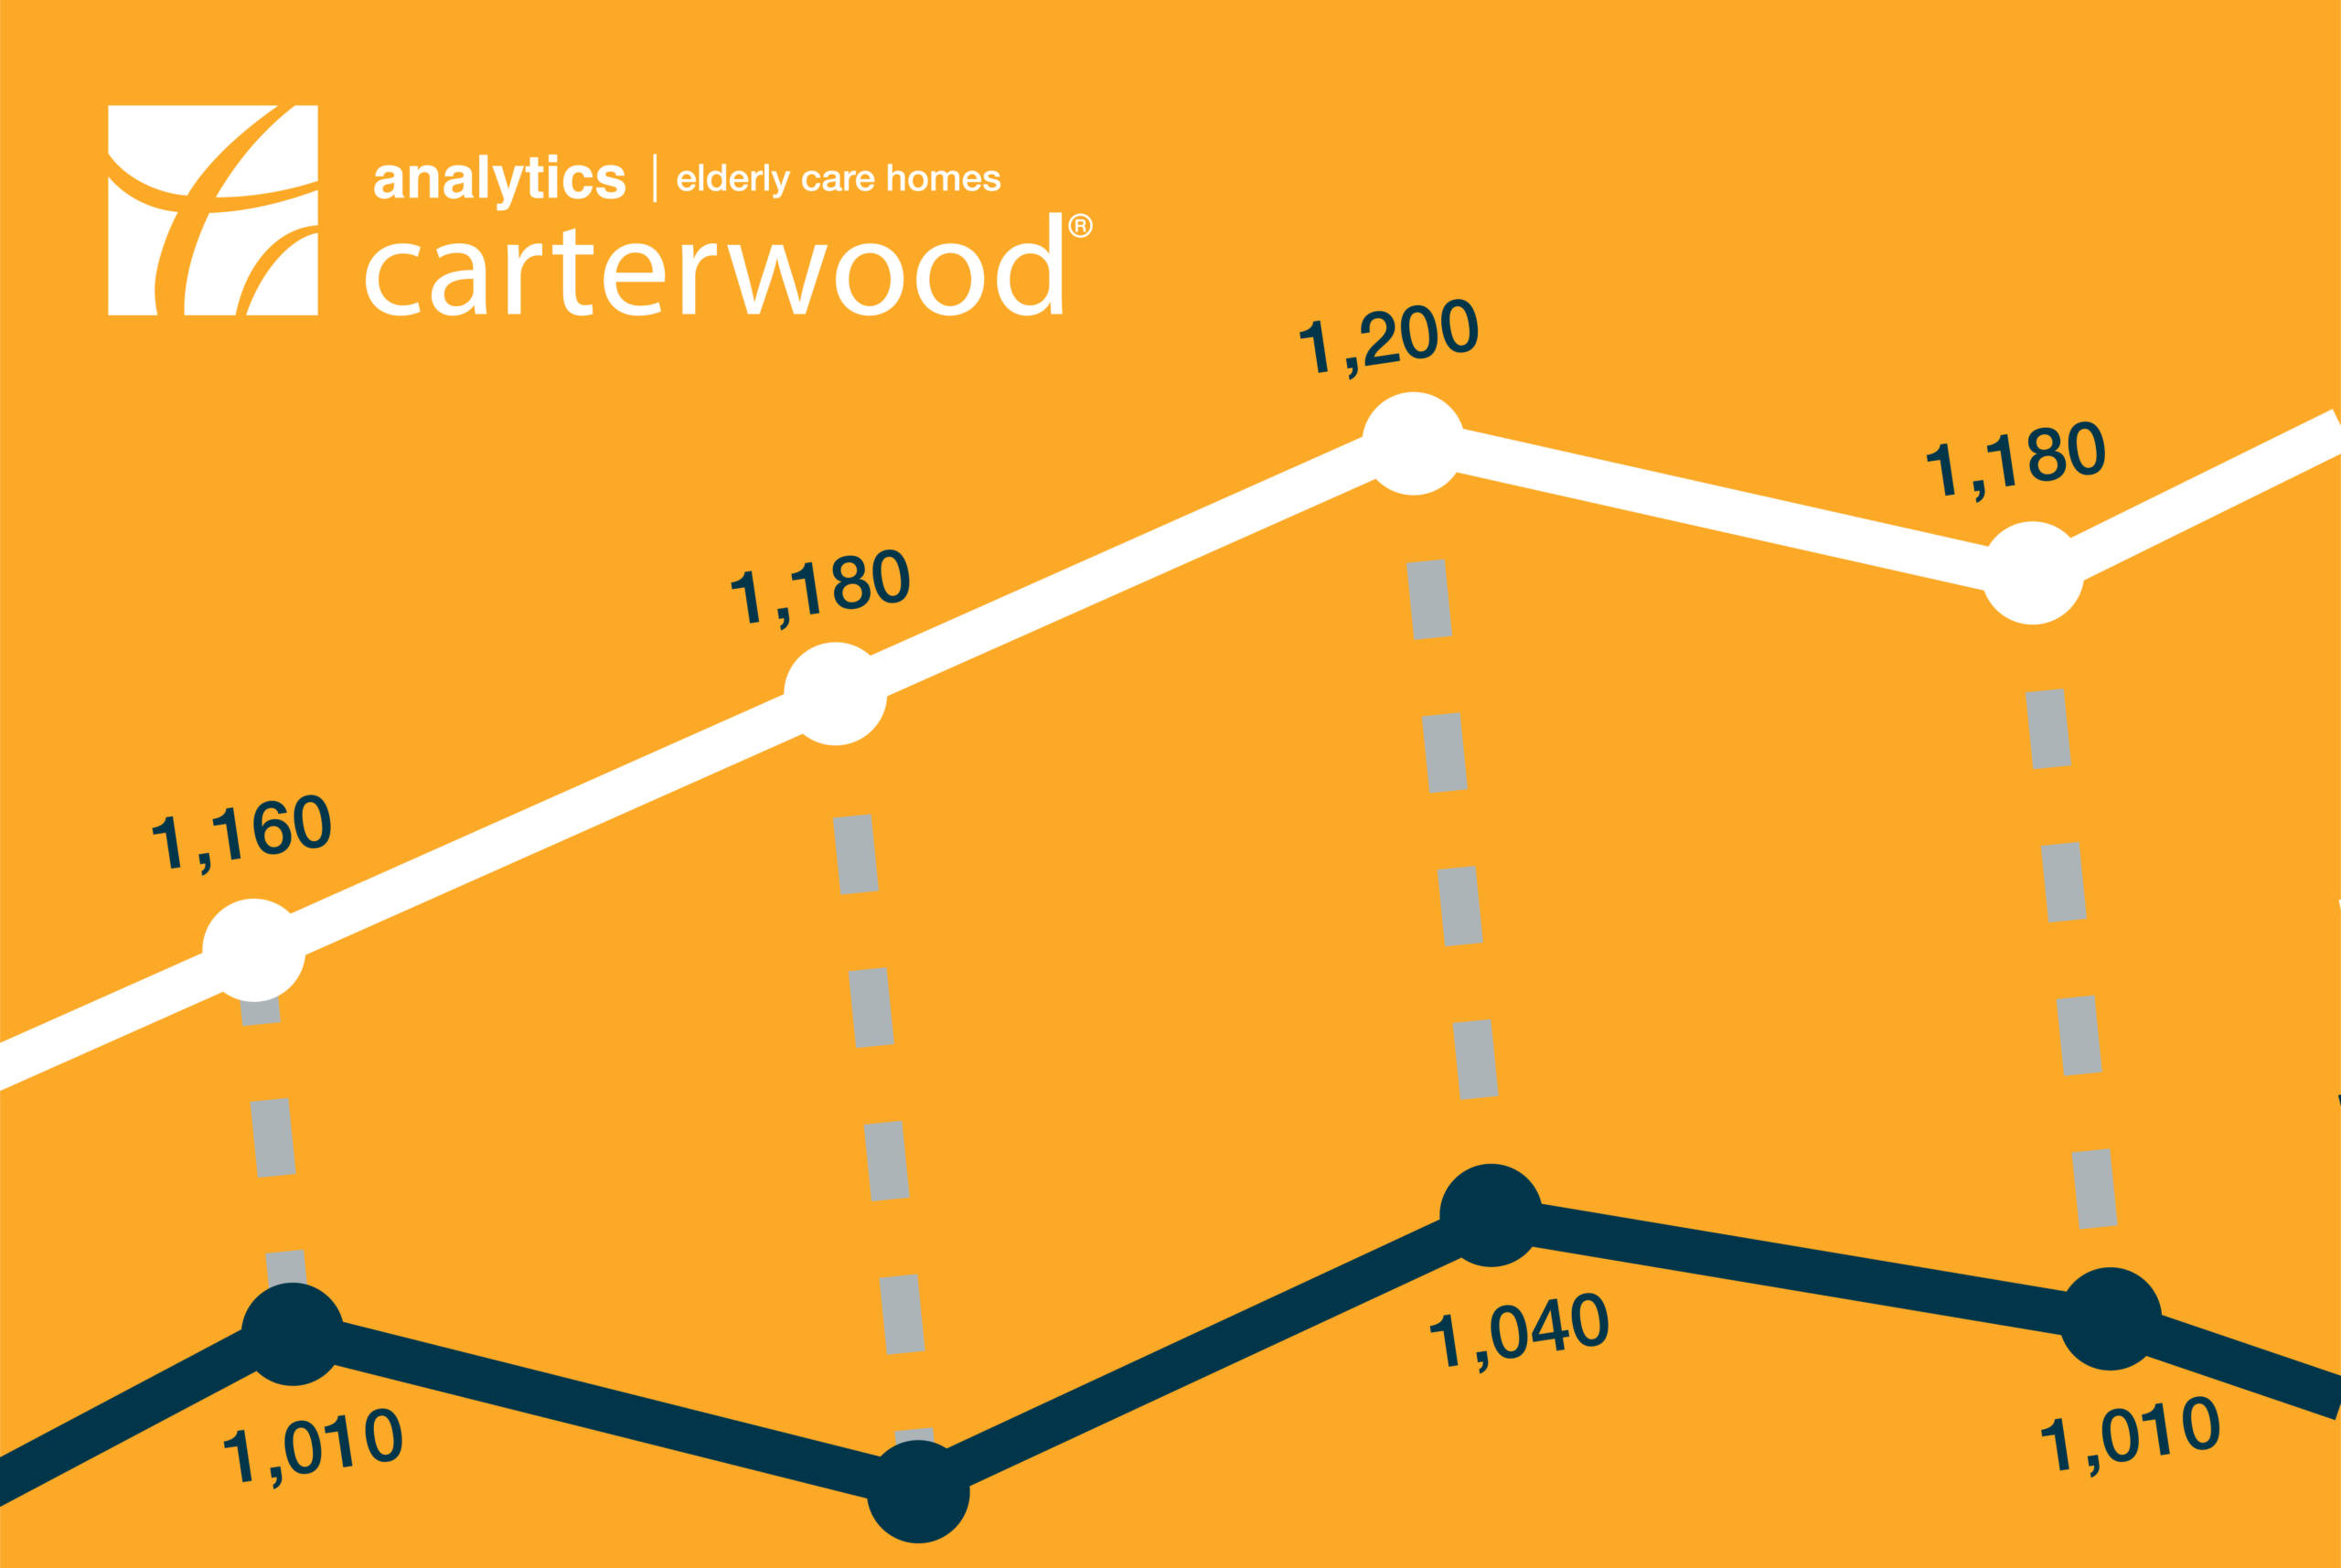 New fee data for 9,150 homes now available in Carterwood Analytics | Elderly Care Homes